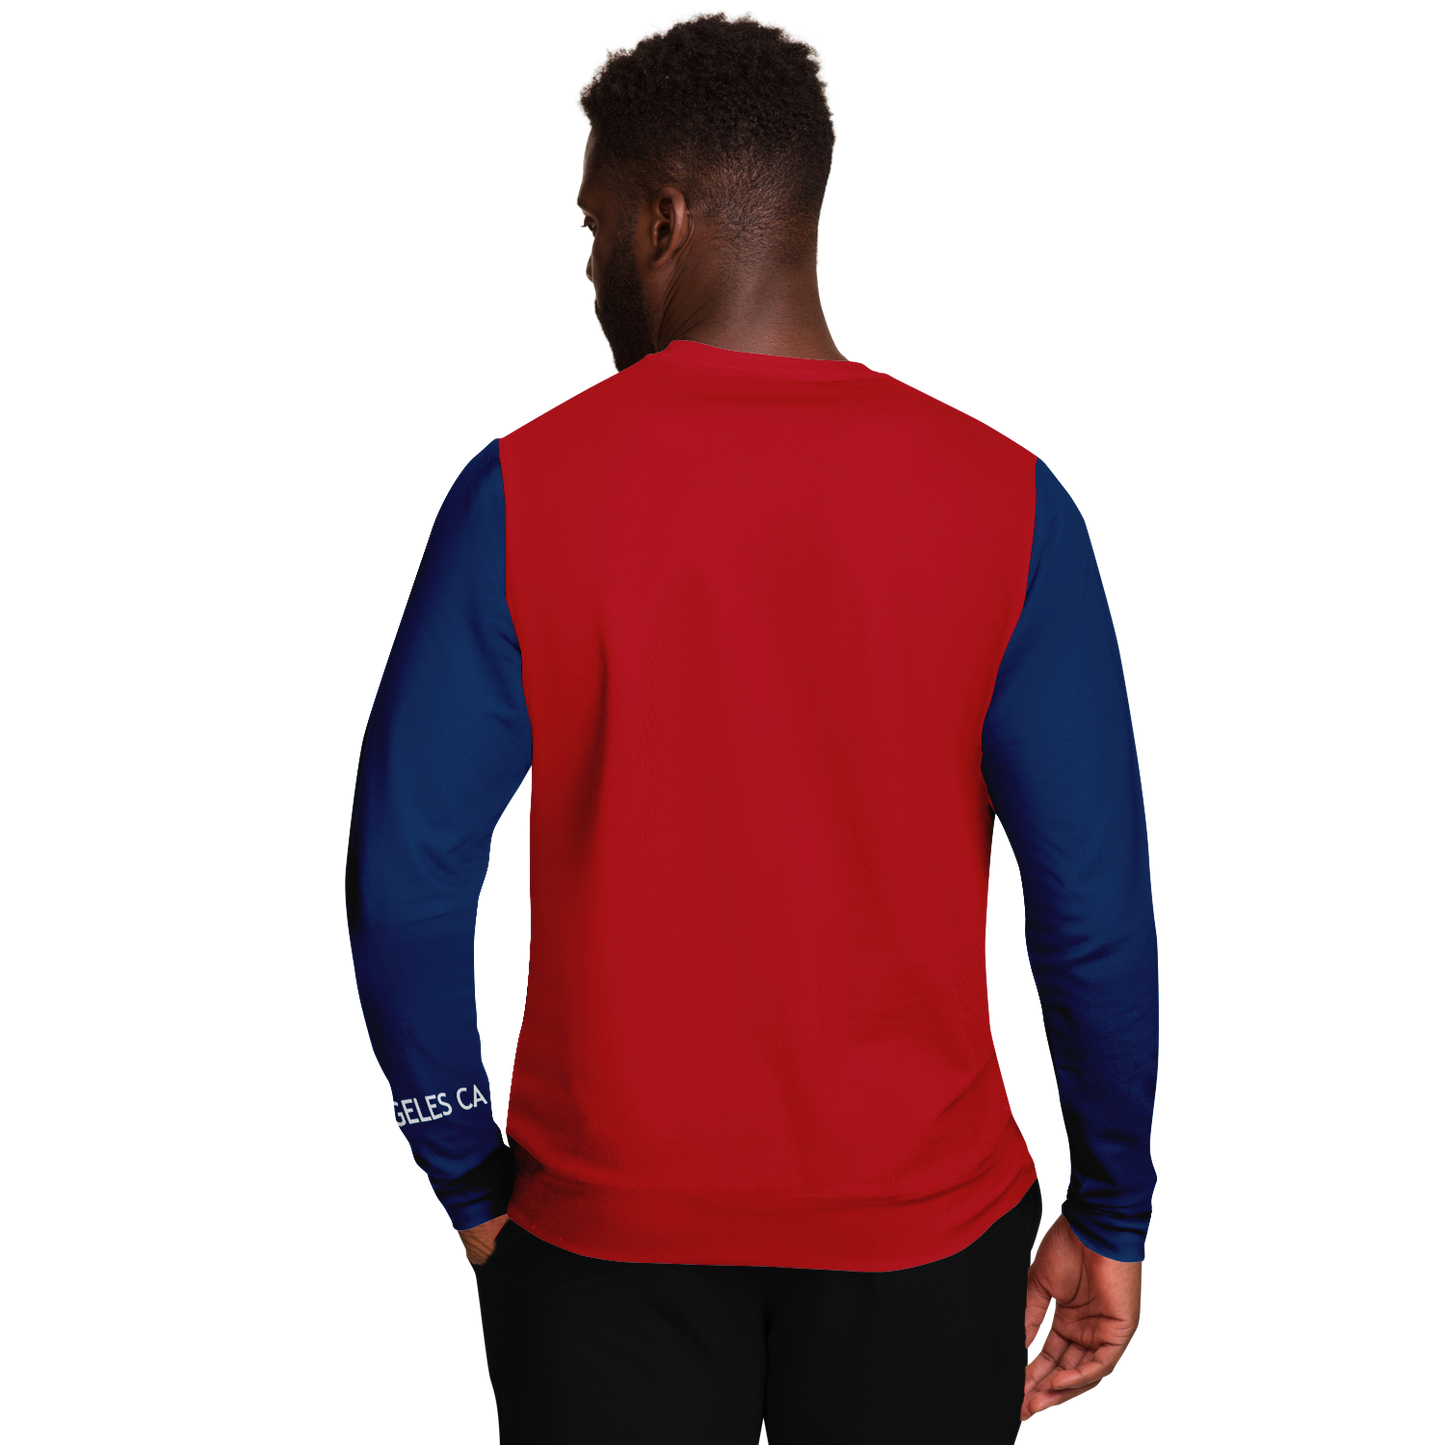 Los Angeles Blue Red Long Sleeve Shirt